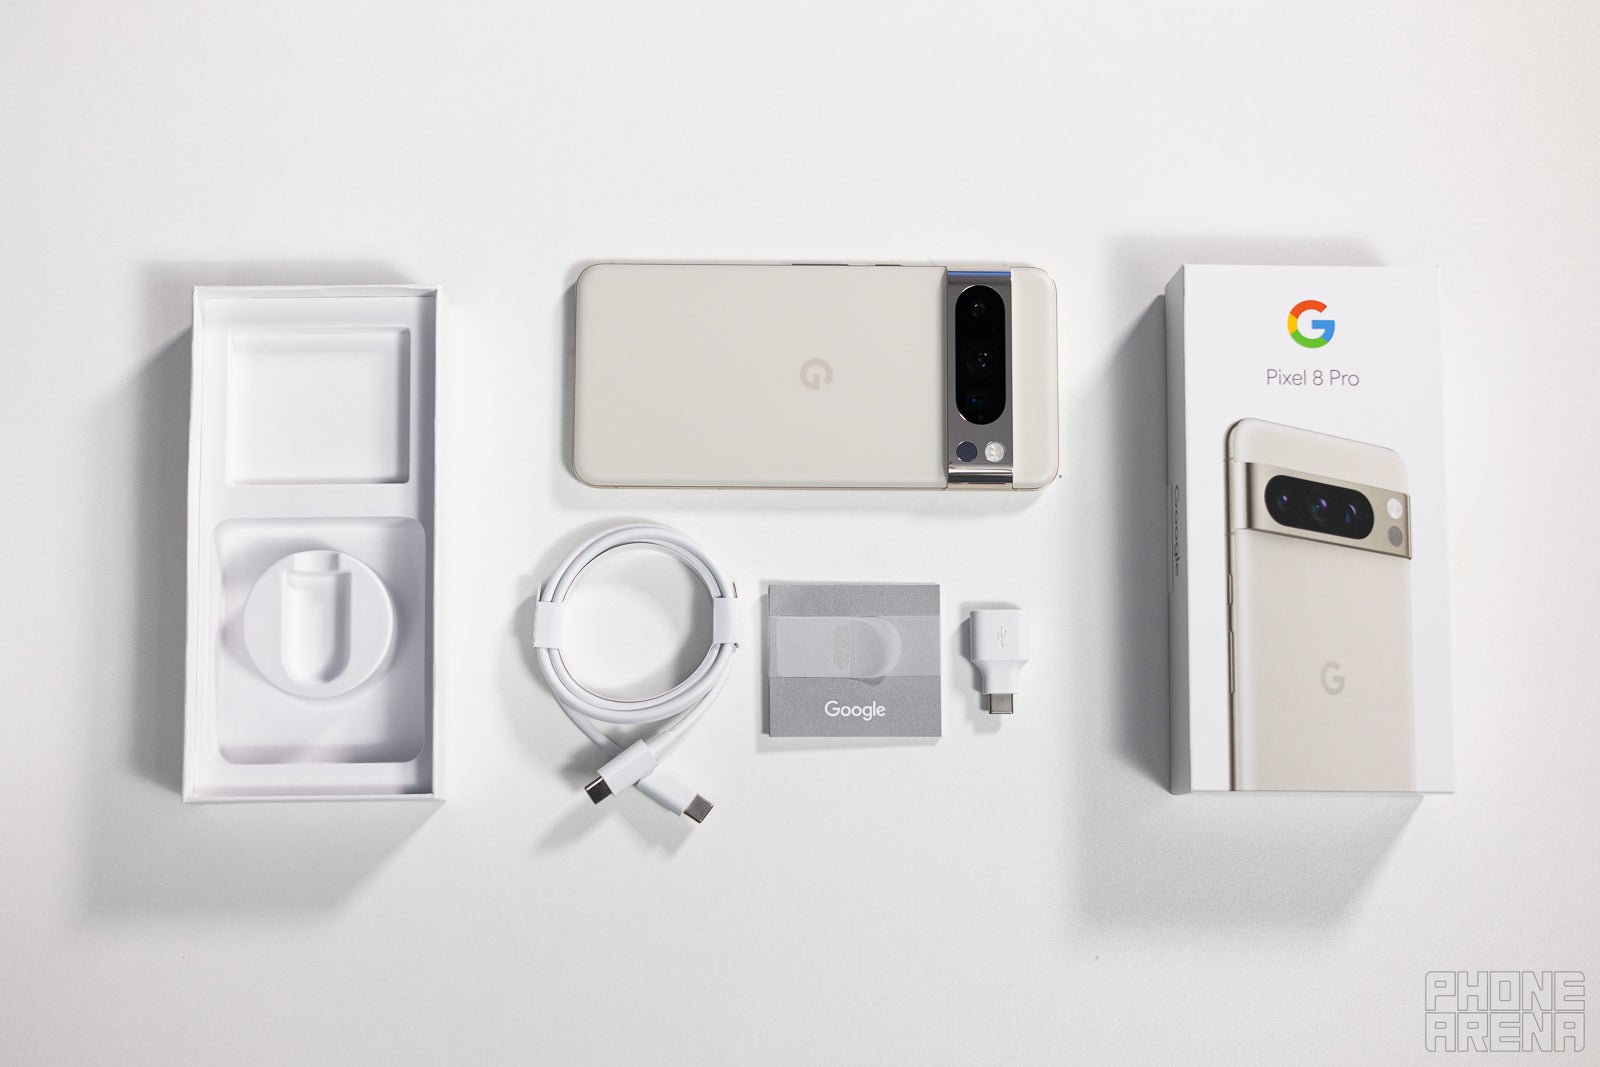 Pixel 8 Pro what is inside the box (Image credit - PhoneArena) - Google Pixel 8 Pro Review: More AI tricks and gradual improvements all around